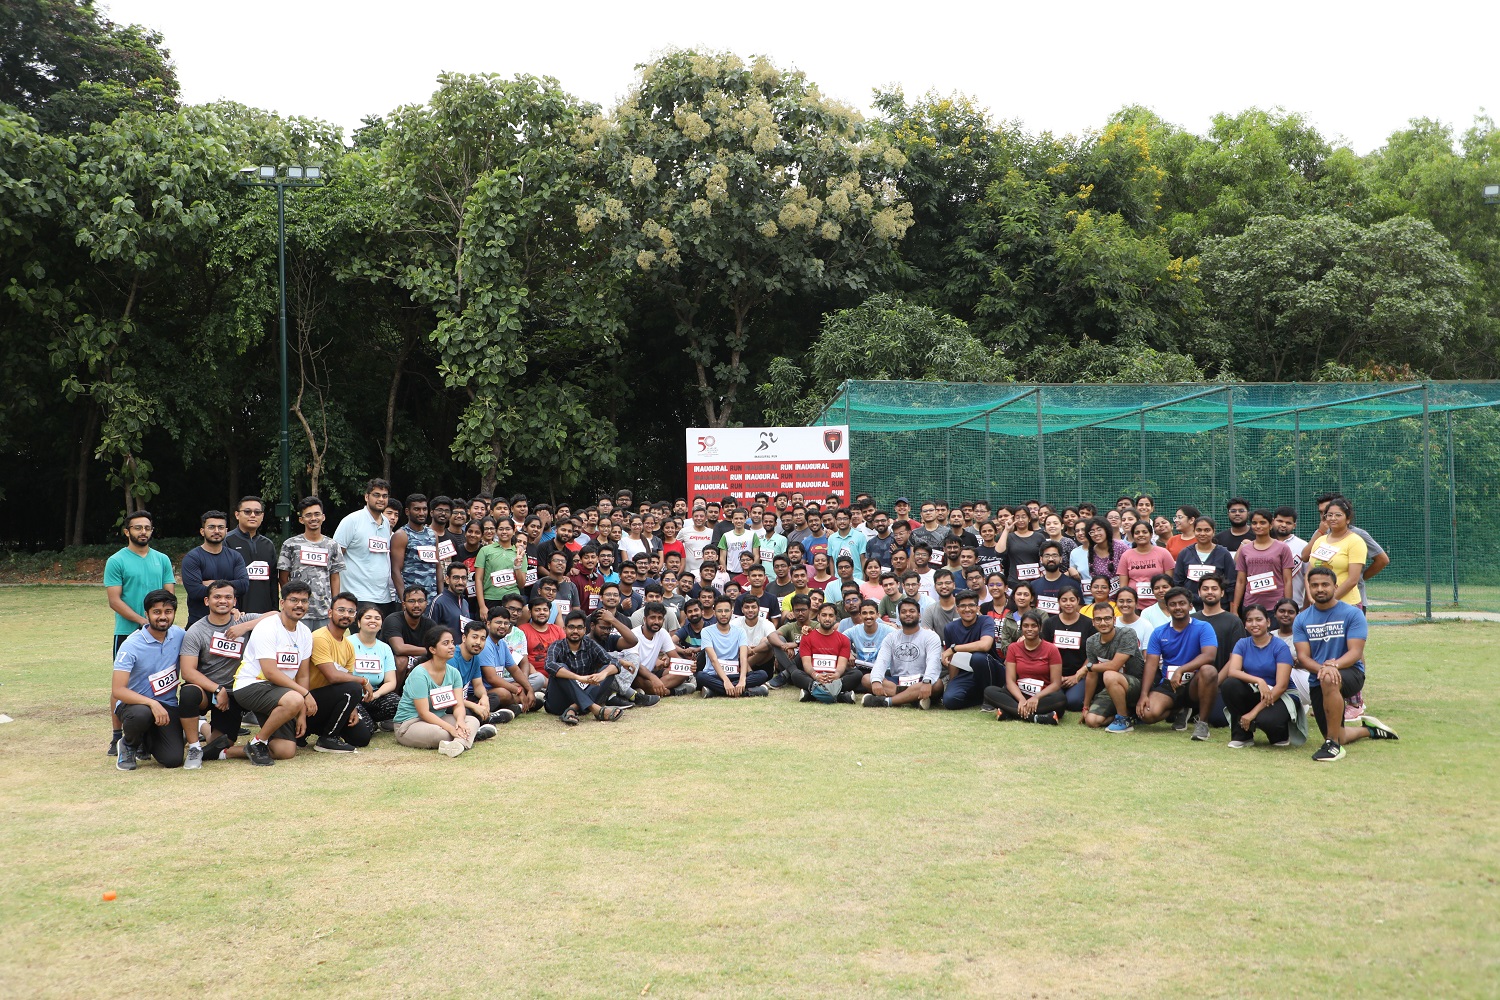 Students of IIMB conducted an inaugural run to welcome the first-year MBA students to campus, on 18th June 2023.